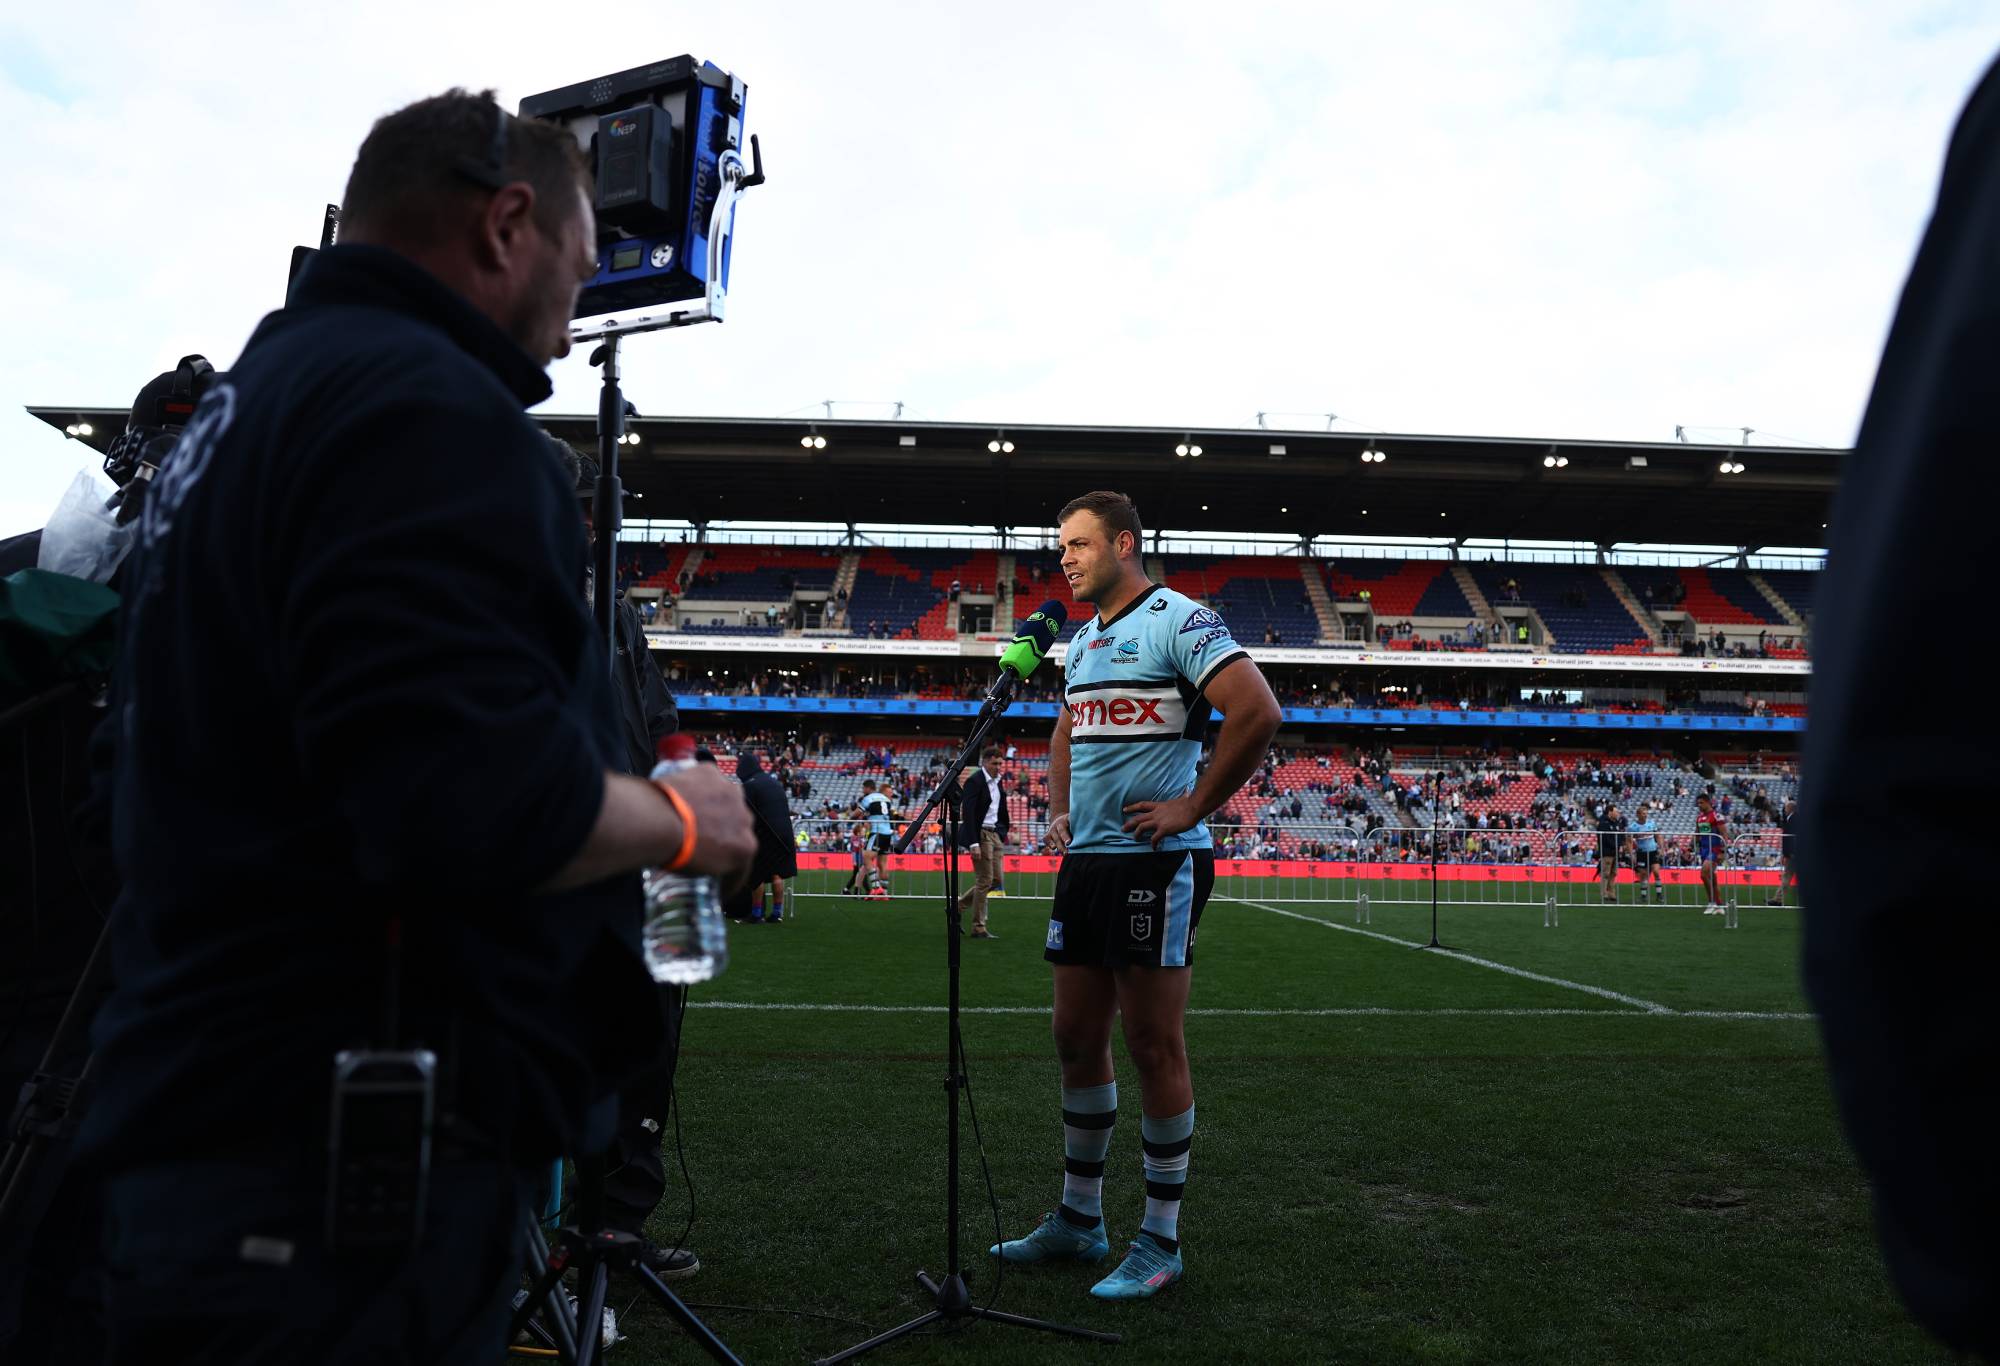 NEWCASTLE, AUSTRALIA - SEPTEMBER 04: Wade Graham of the Sharks is interviewed after the round 25 NRL match between the Newcastle Knights and the Cronulla Sharks at McDonald Jones Stadium, on September 04, 2022, in Newcastle, Australia. (Photo by Mark Metcalfe/Getty Images)